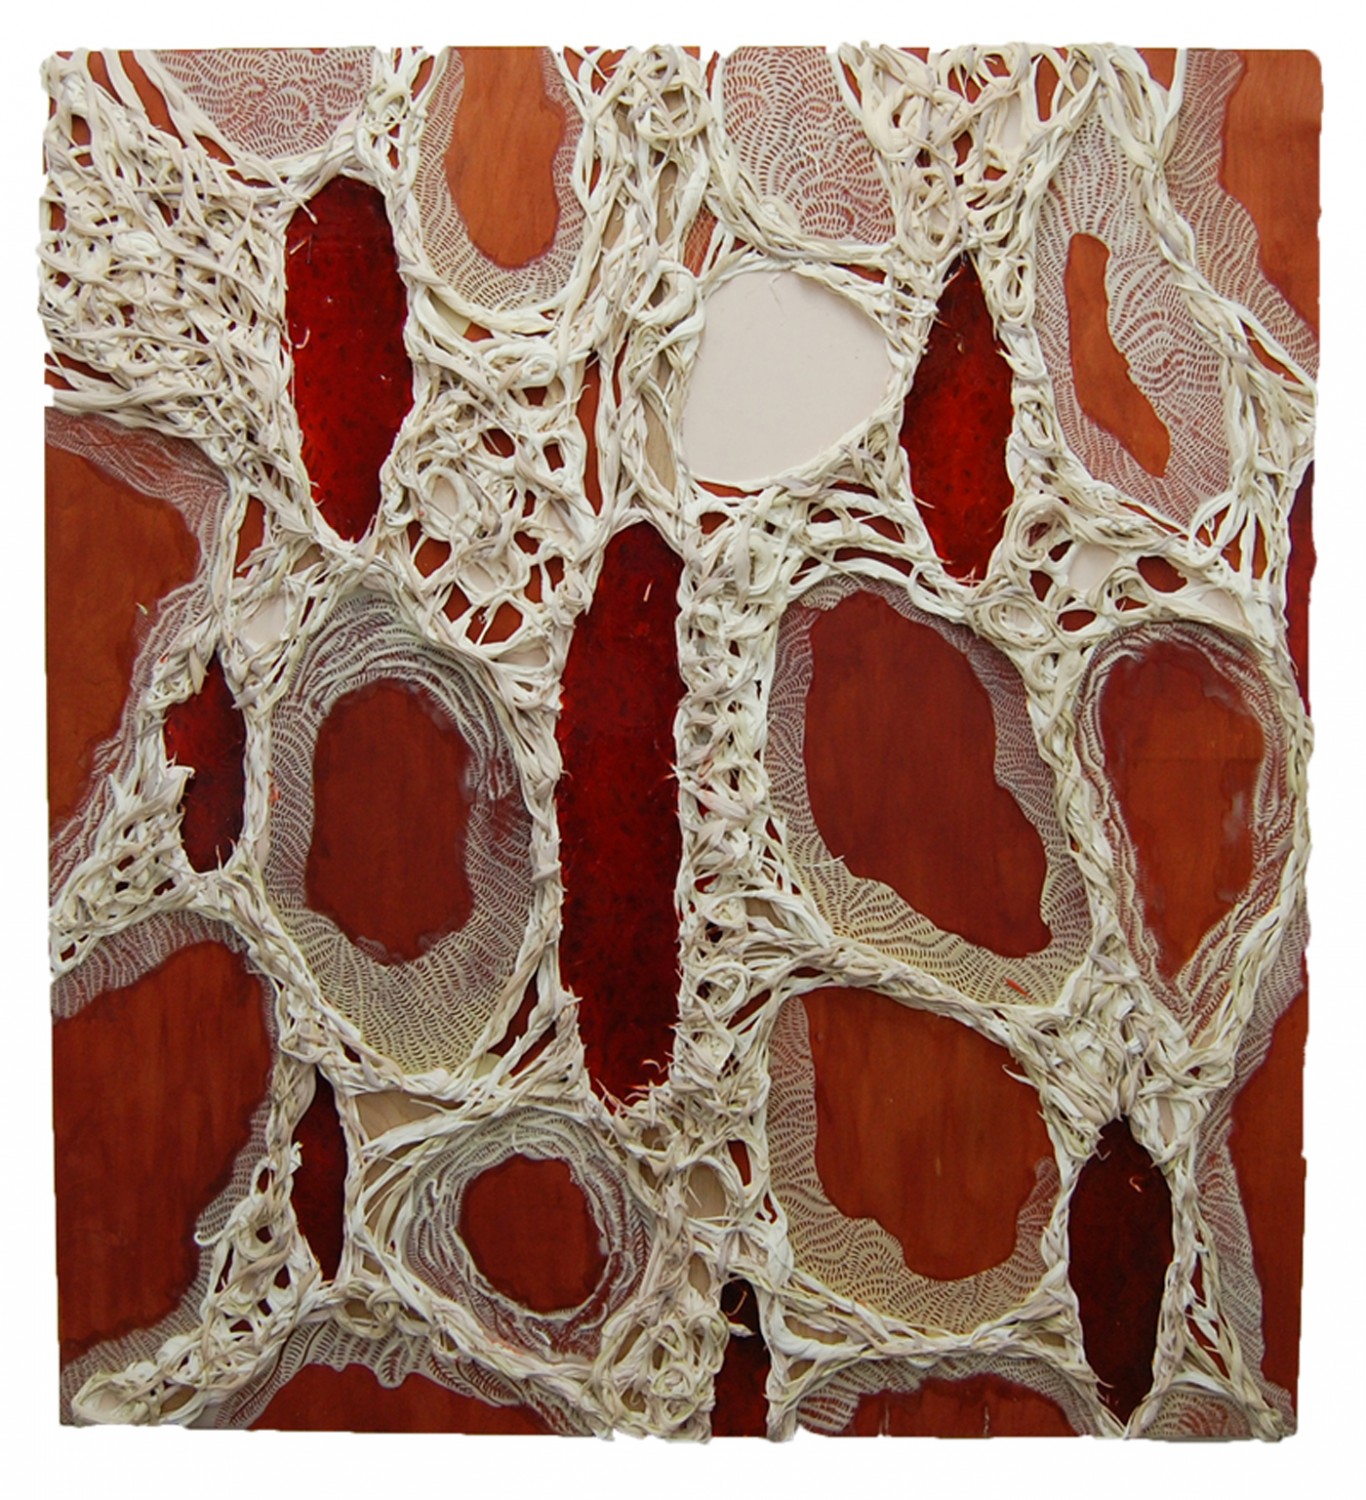 Cells and Sinew, 2013, Encaustic, Ultralight, urethane, dispersions and thread on panel, 66 x 60 inches